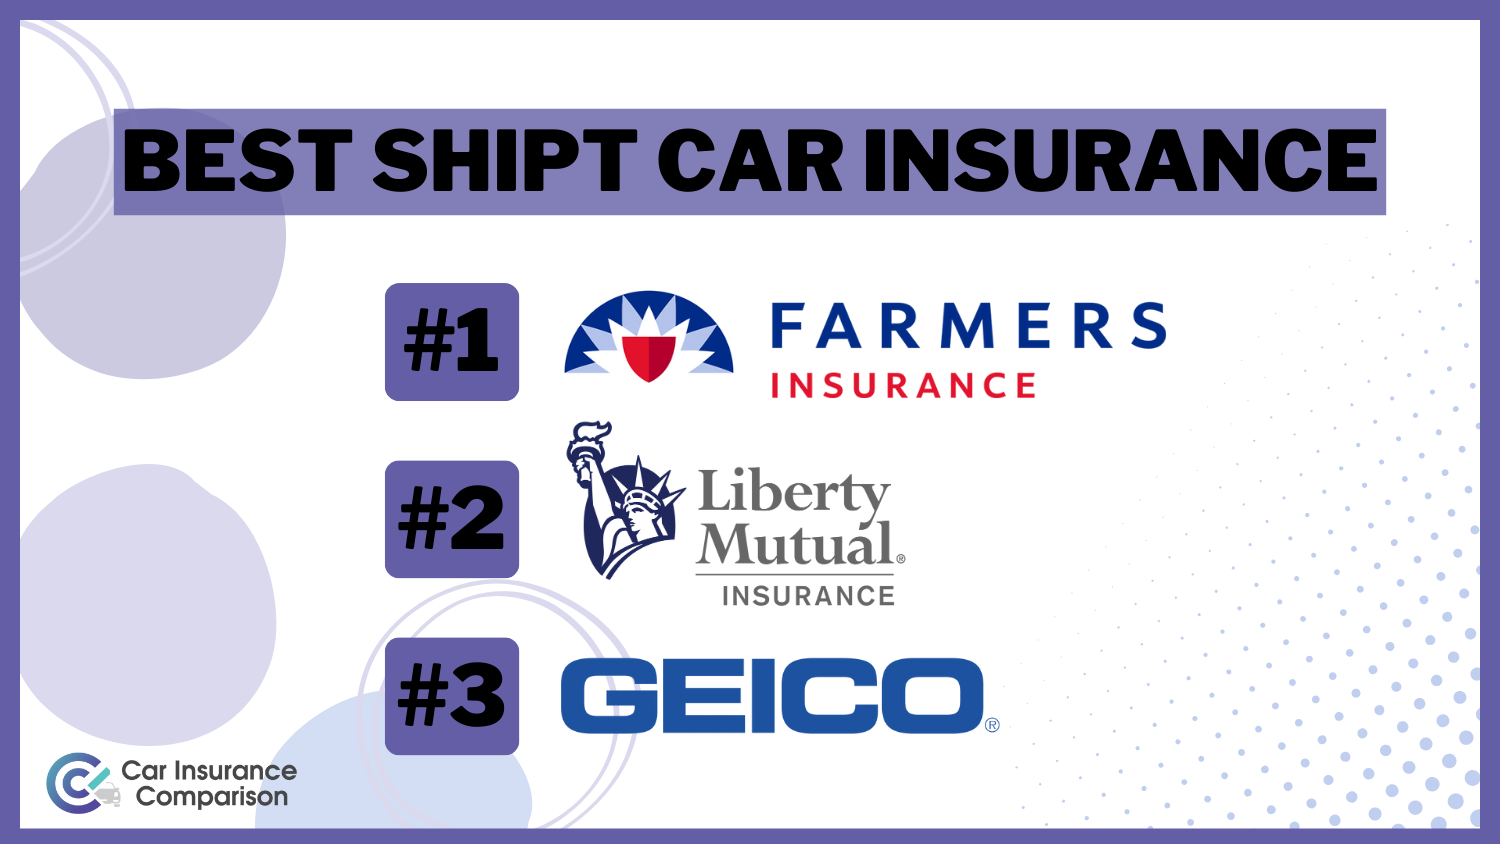 Best Shipt Car Insurance: Farmers, Liberty Mutual, and Geico